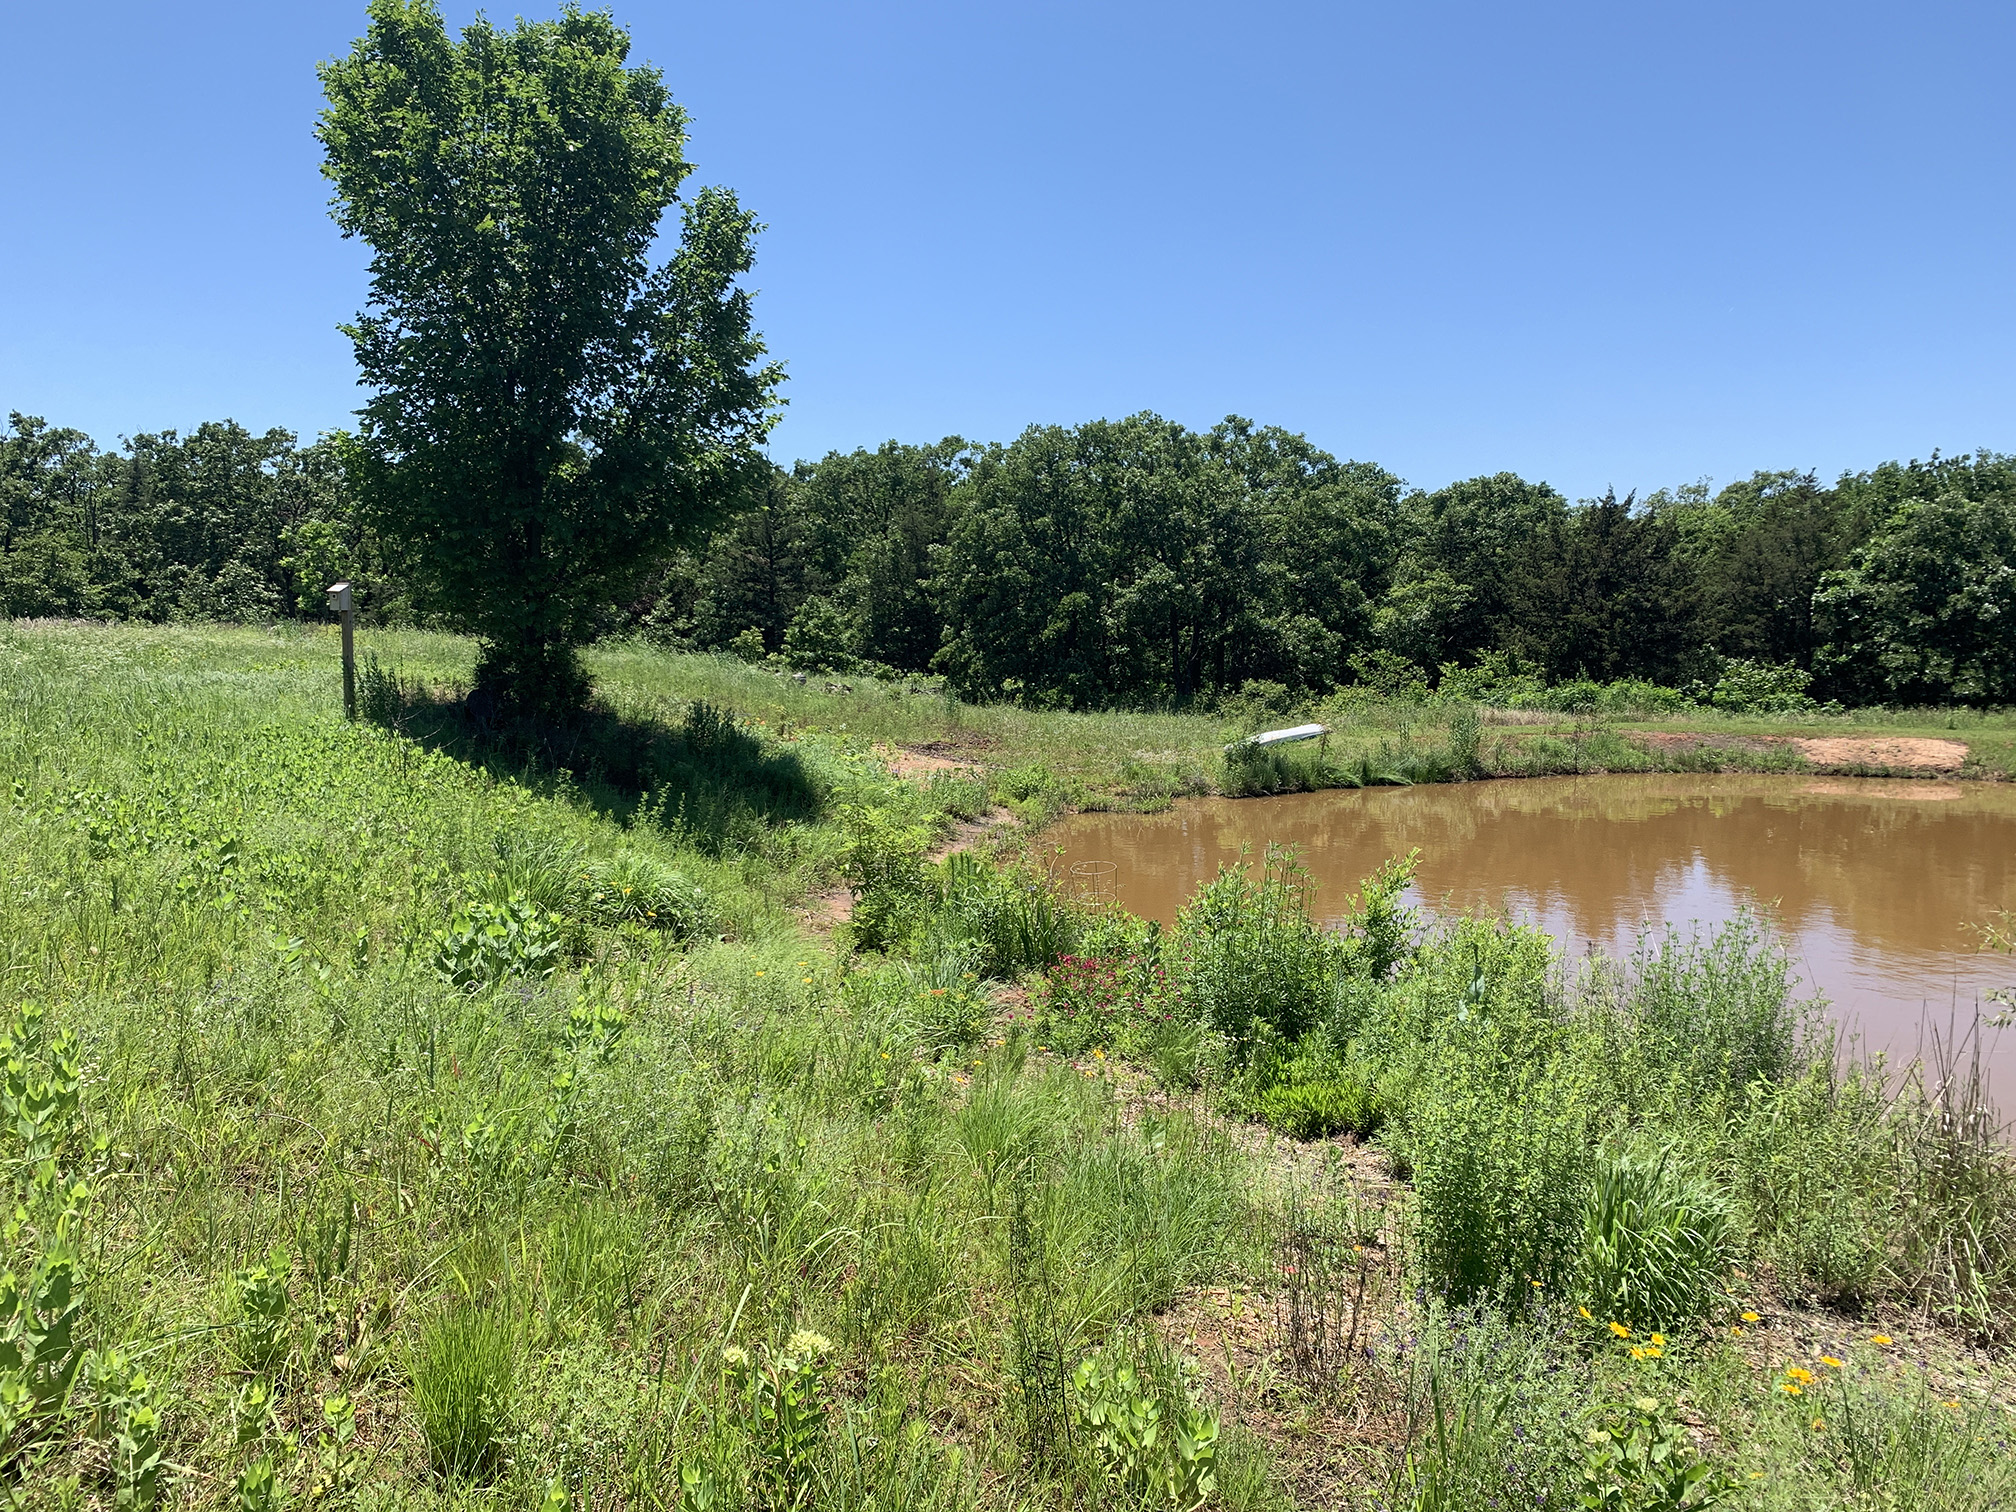 The prairie is vibrant green with freshly grown grasses and flowers. On the right is the pond, with trees in the background.